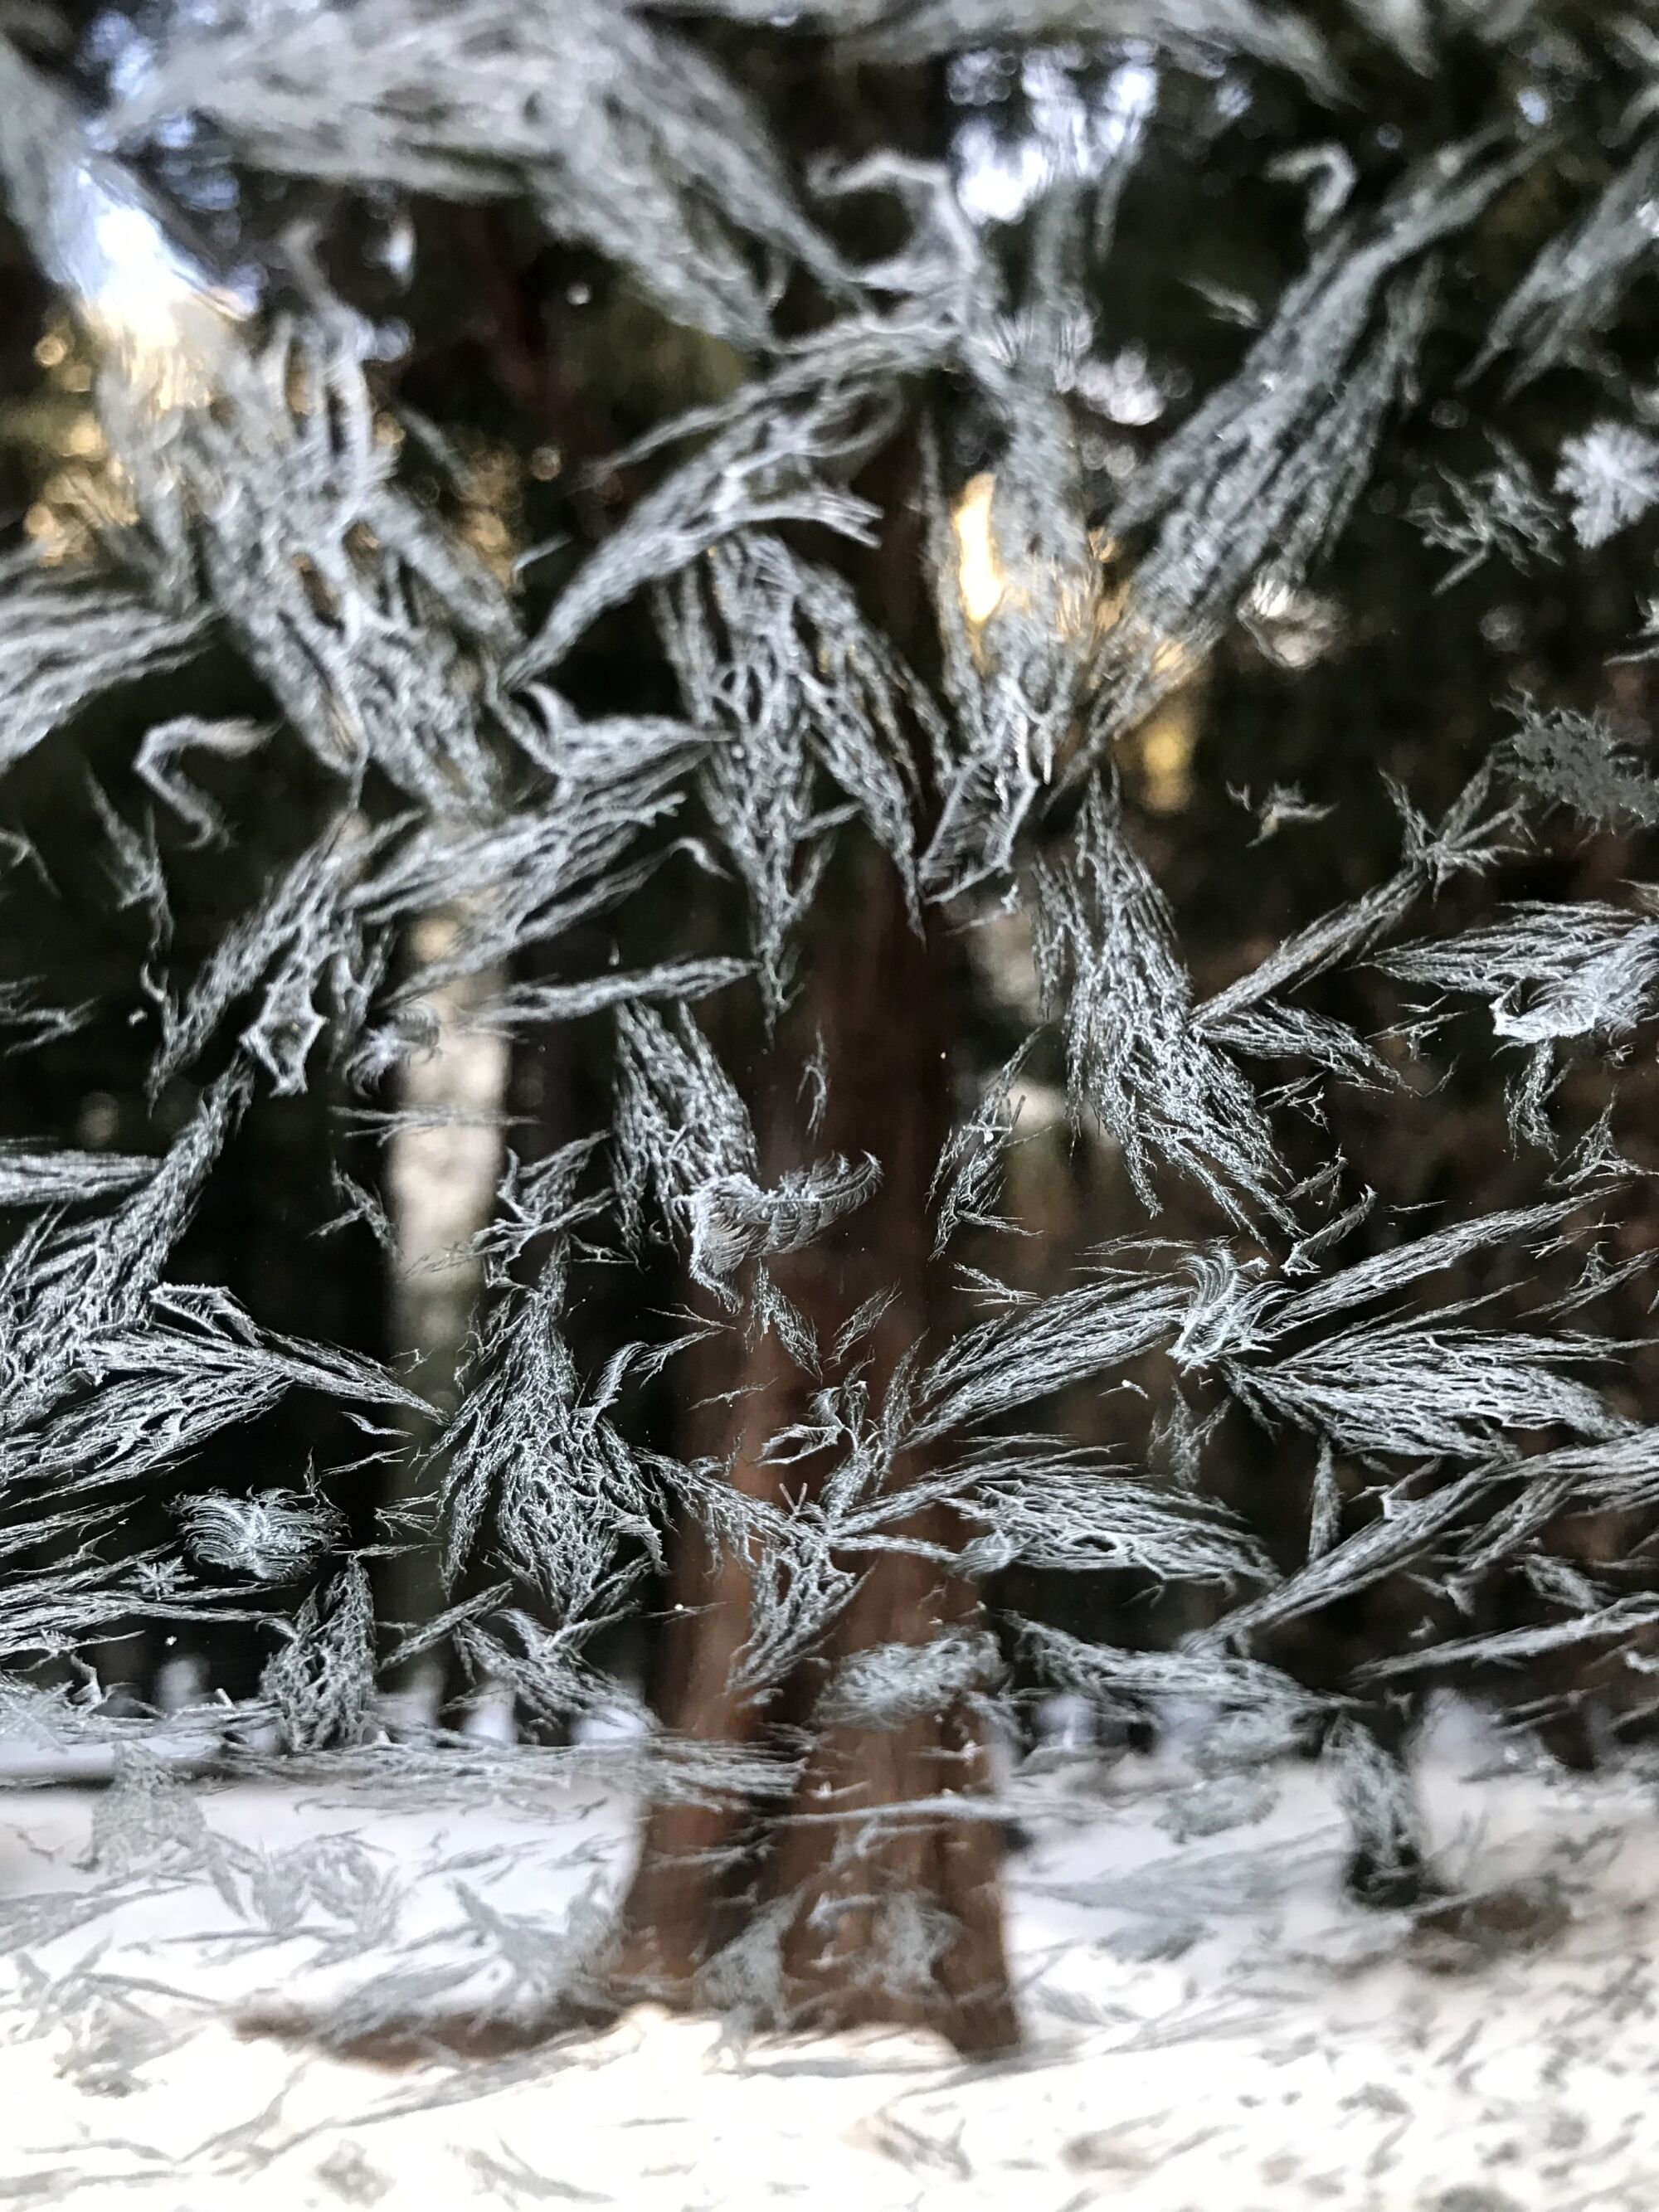 Ice crystals on glass